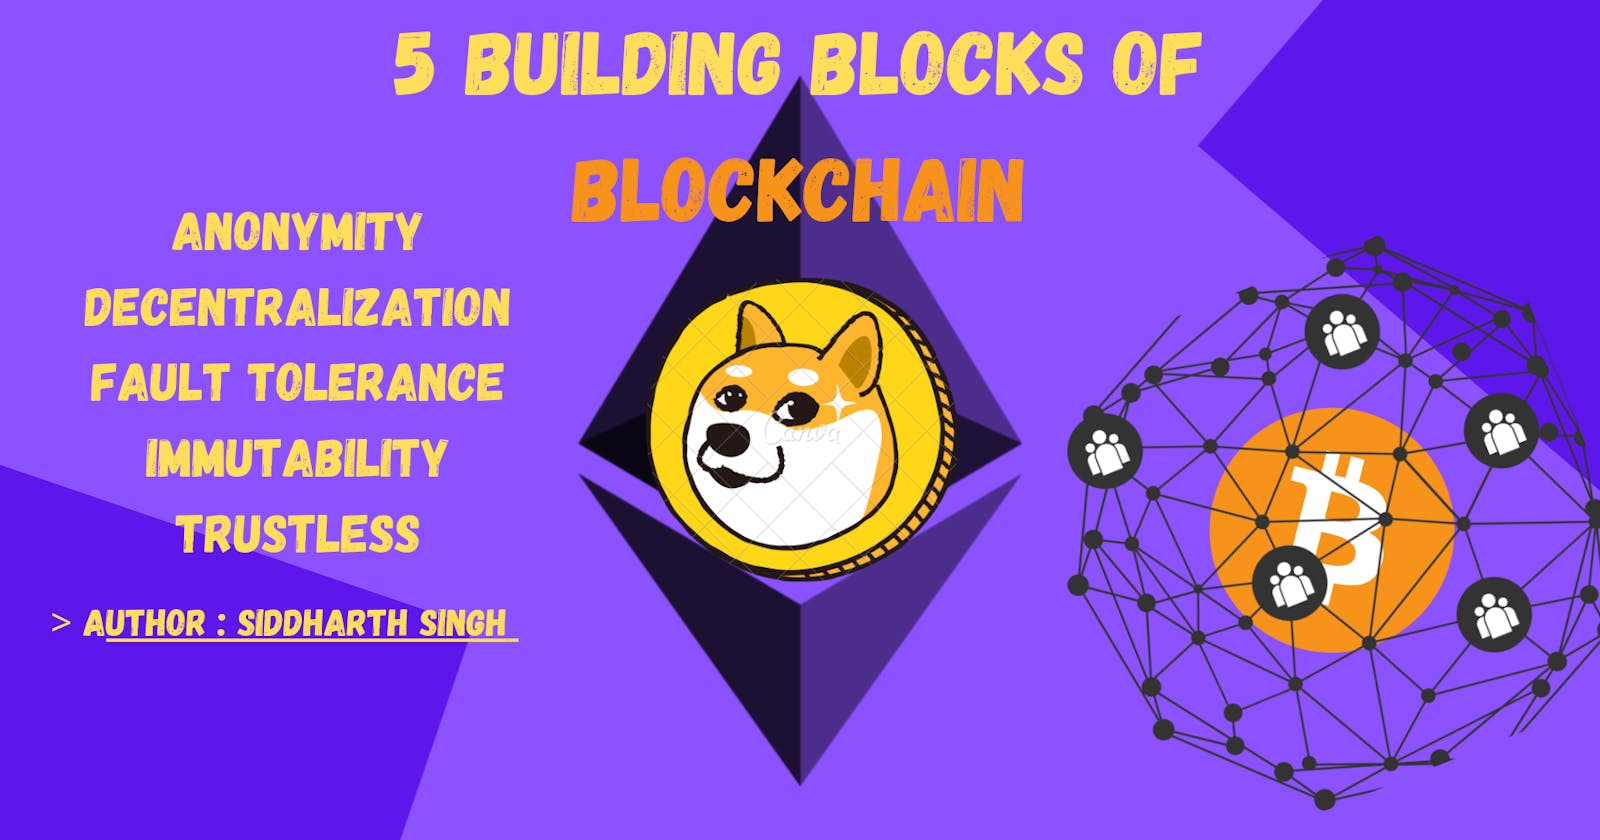 5 key components of blockchain every developer should know